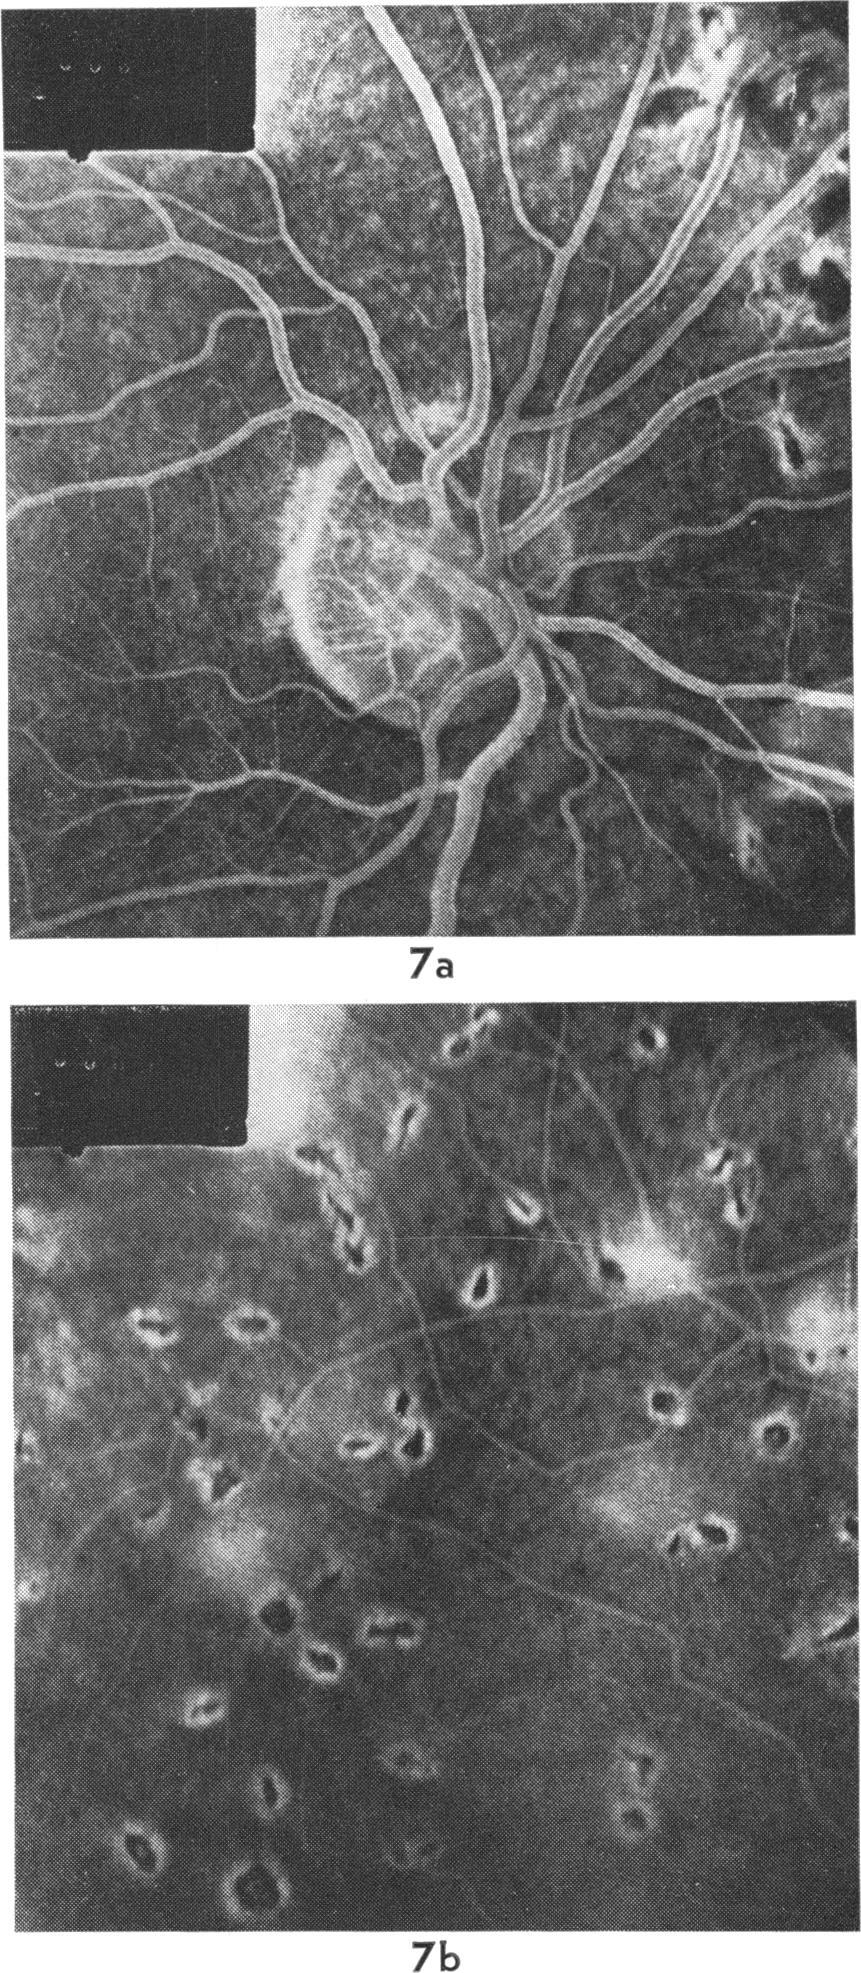 Late ocular manifestations in neonatal herpes simplex infection Oc Fig. 6a-e Case 4 Left eye. Good view of choroidal fluorescence even in the macular area (a).